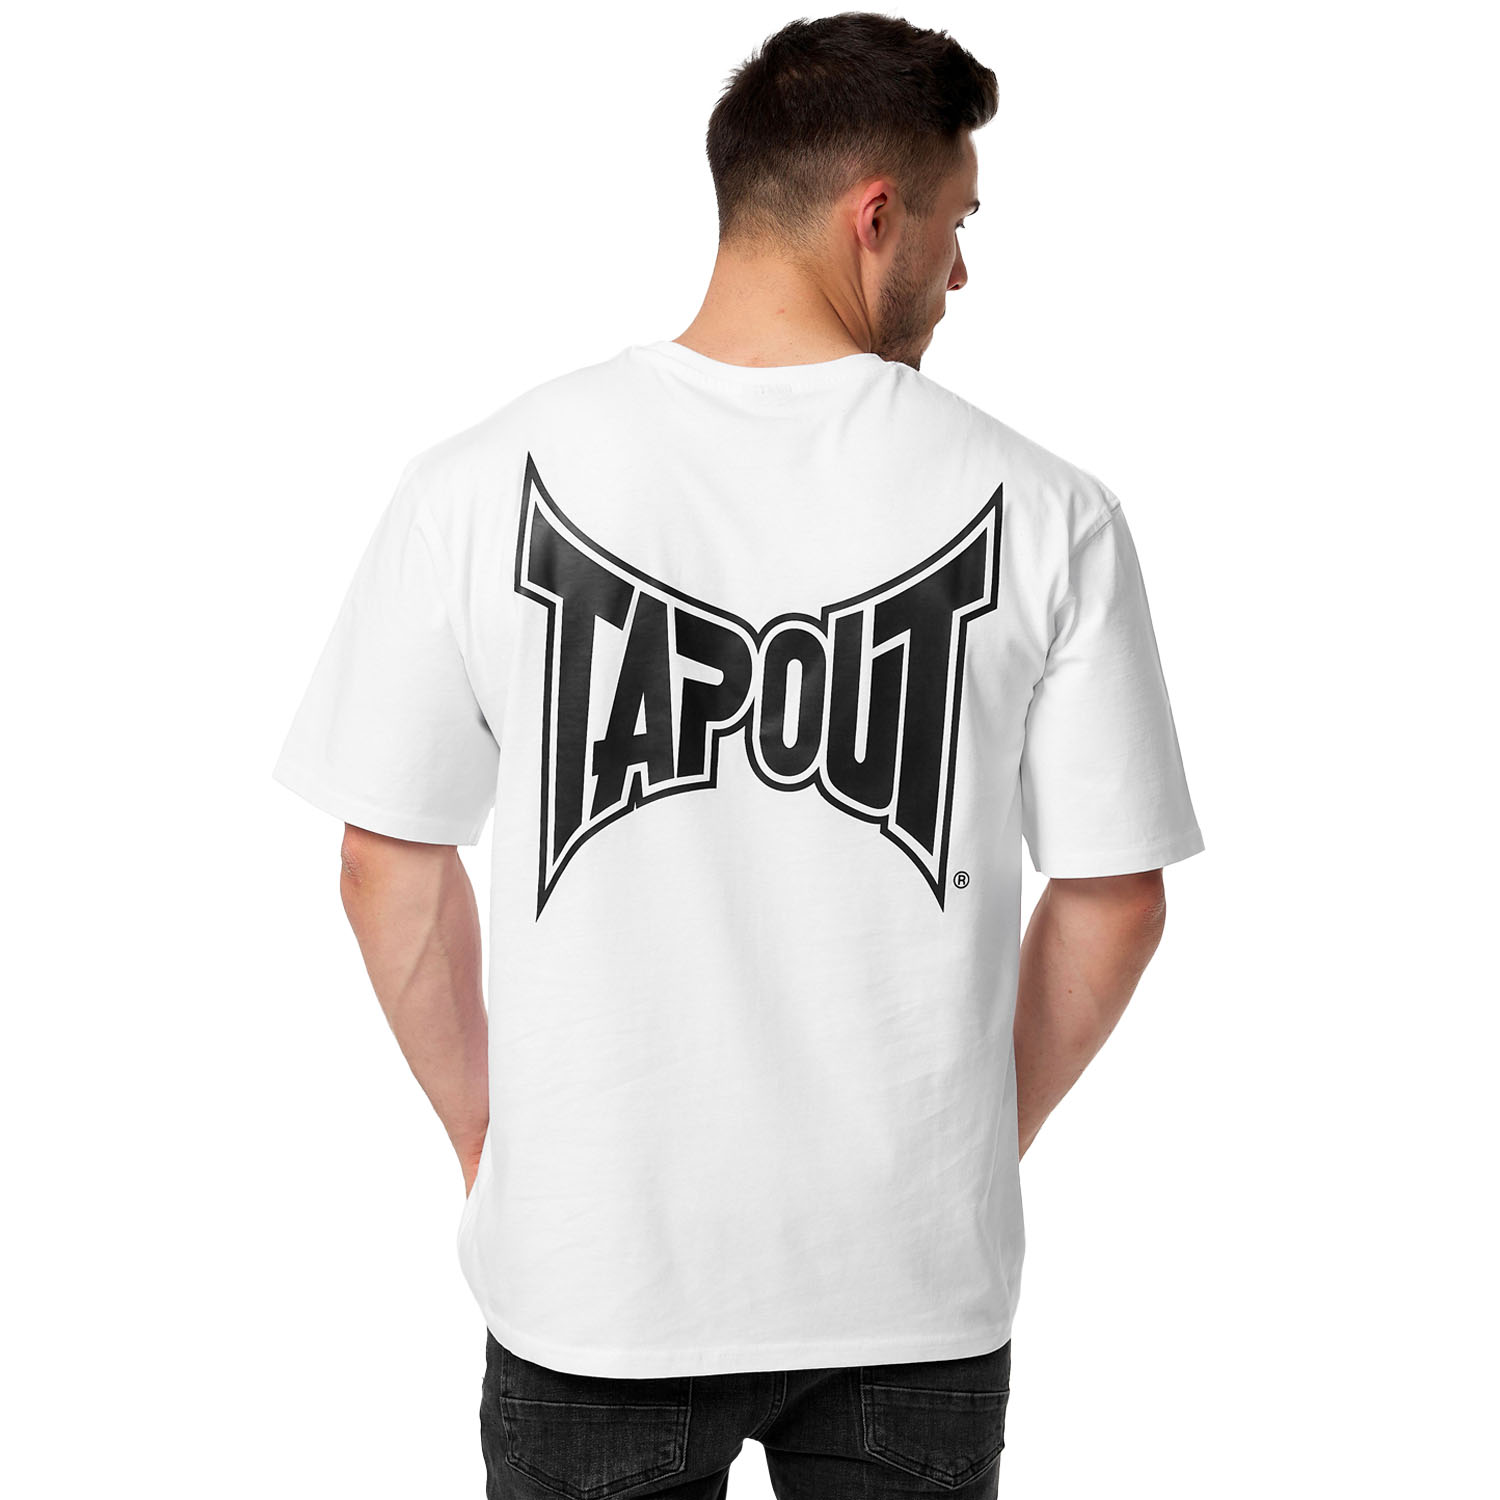 Tapout T-Shirt, Creekside, white-black, S